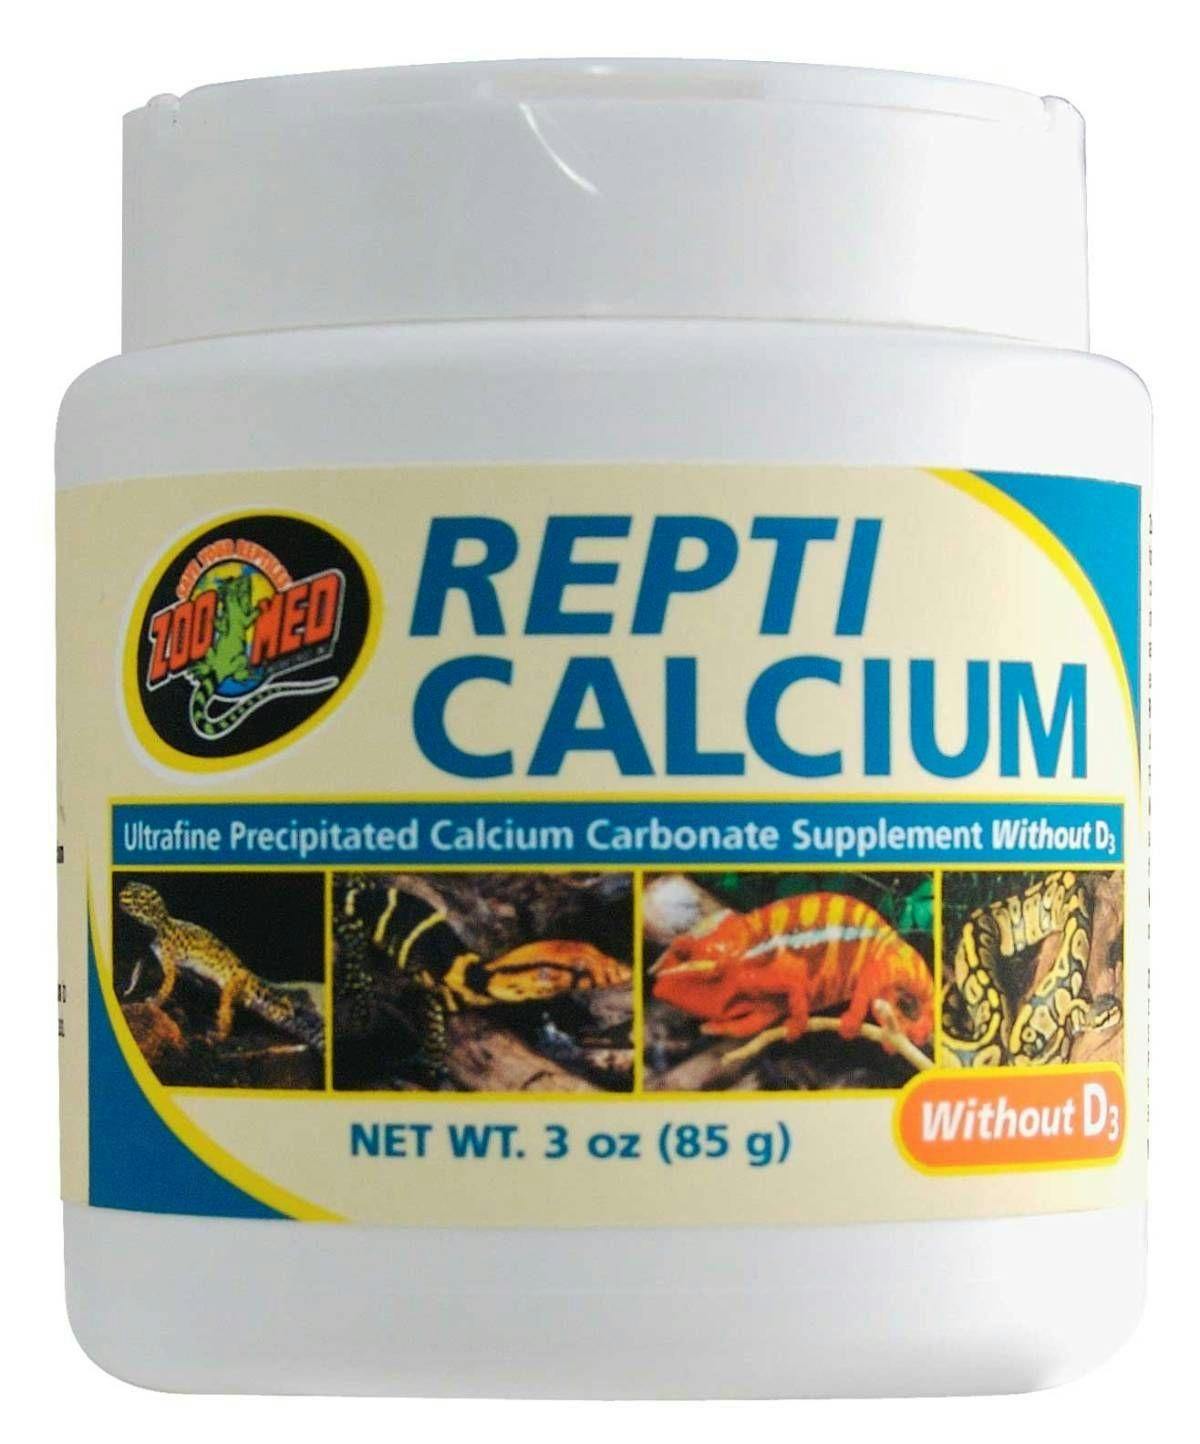 Image for Zoo Med Repti Calcium without D3 (3 oz) by Josh's Frogs